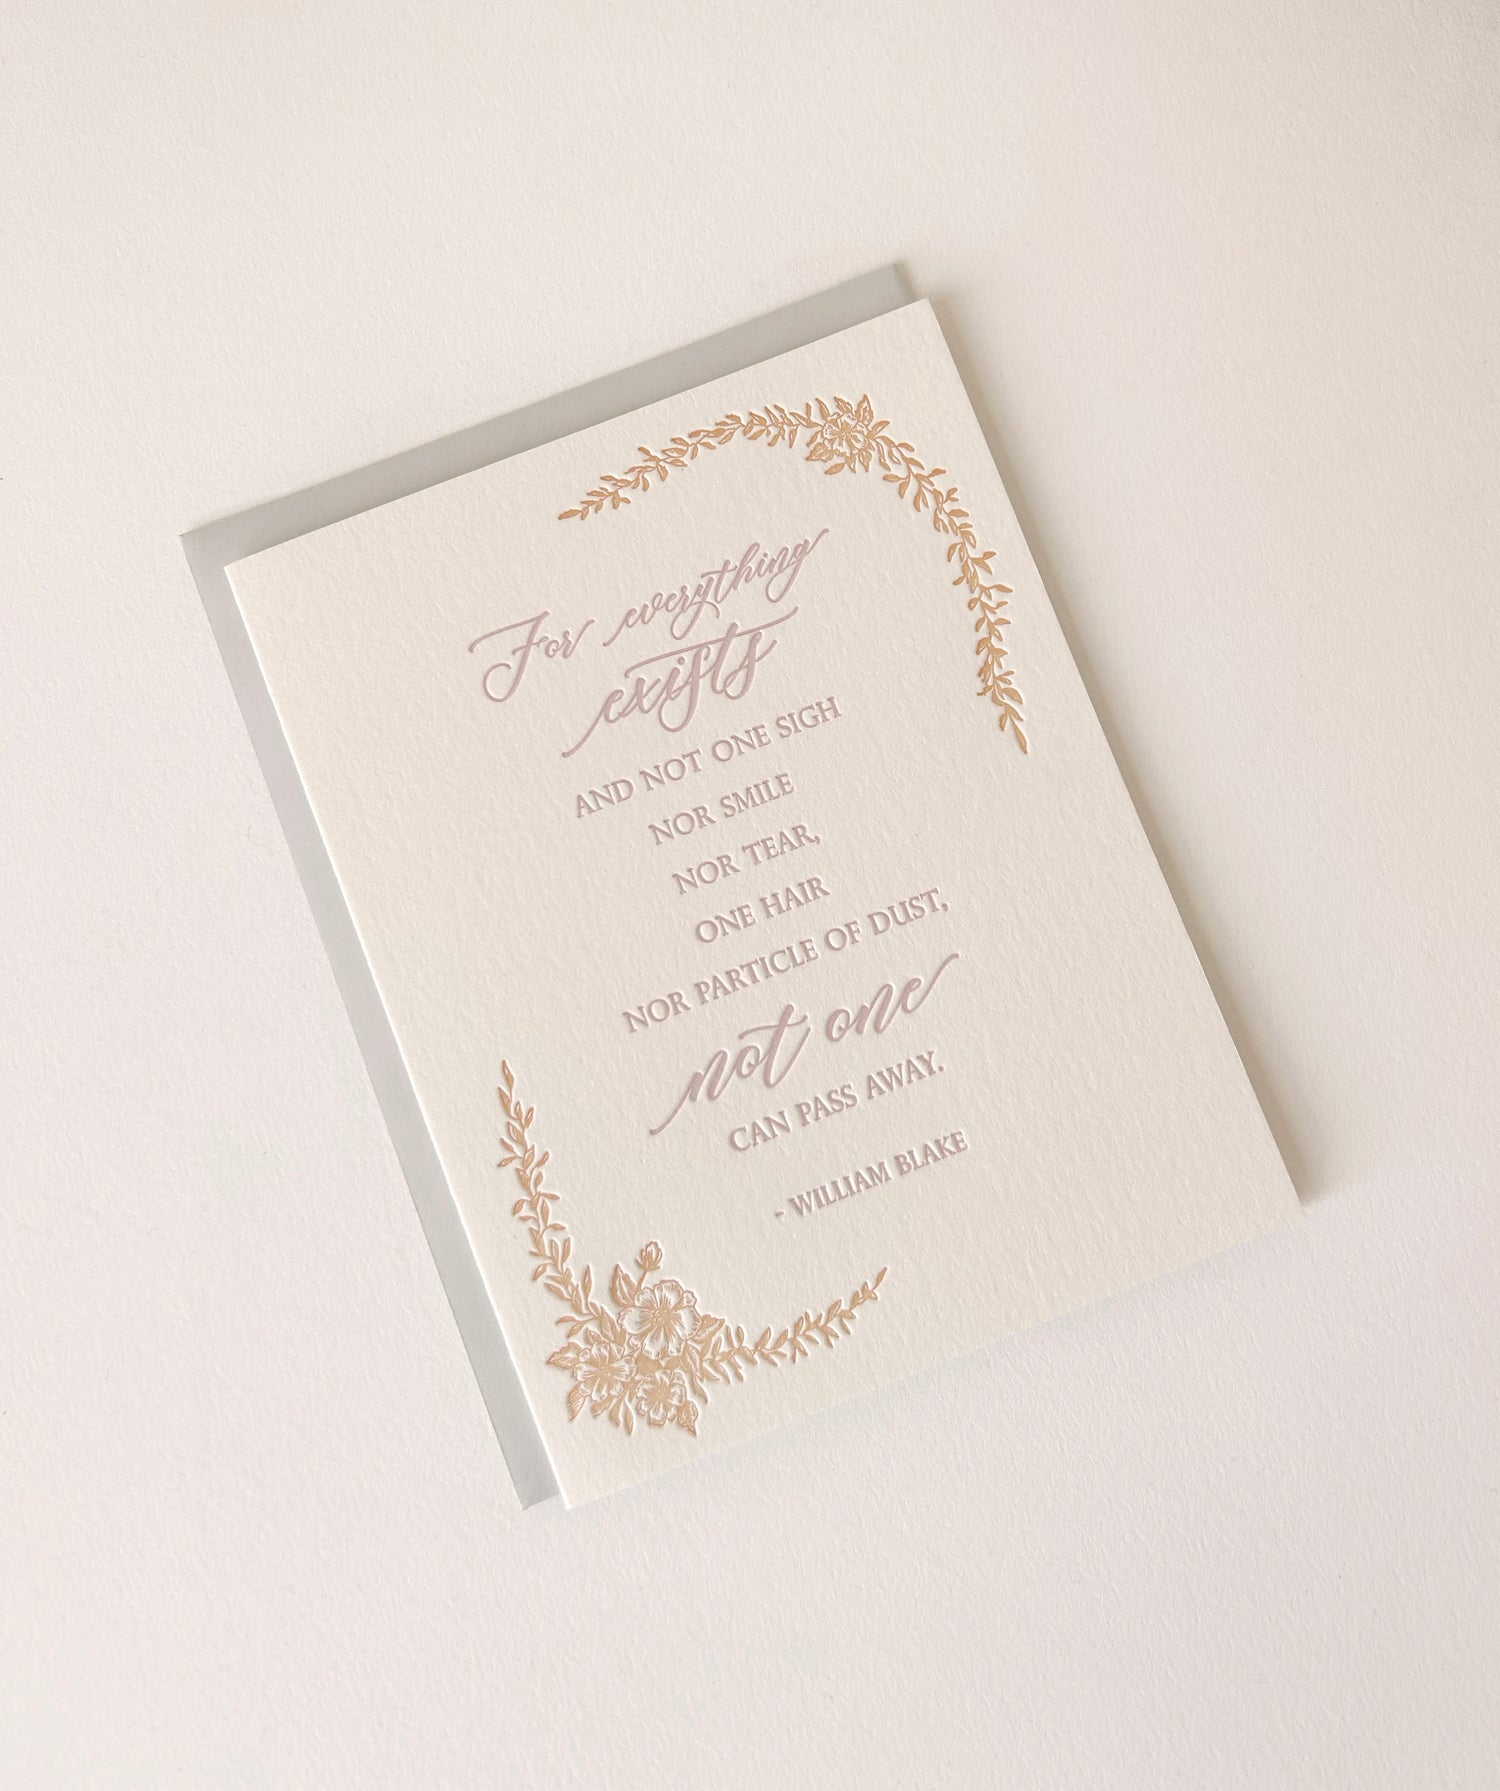 Letterpress sympathy card with florals that says "For everything exists and not one sigh nor smile nor tear one hair nor particle of dust, not one can pass away.- William Blake" by Rust Belt Love